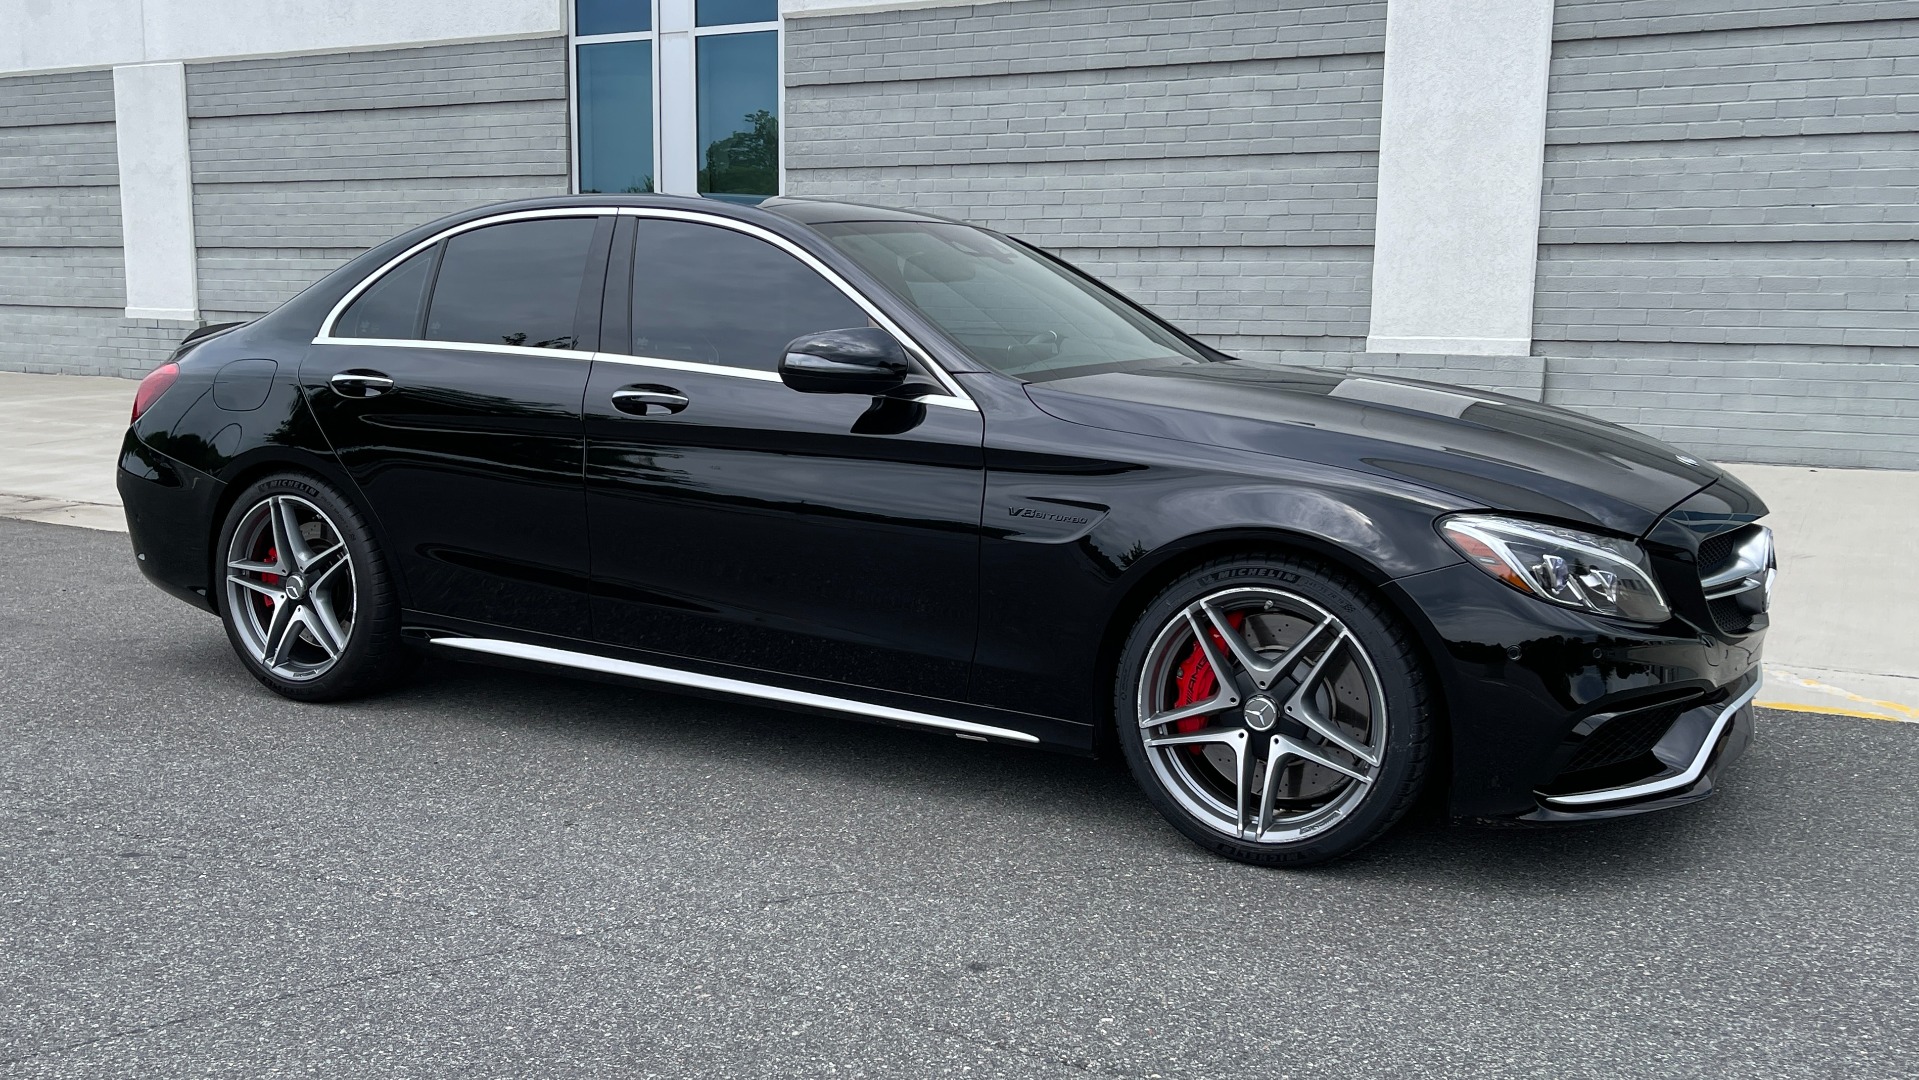 Used 2016 Mercedes-Benz C-CLASS AMG C 63 S SEDAN / NAV / BURMESTER / PANO-ROOF / CAMERA for sale $58,000 at Formula Imports in Charlotte NC 28227 6